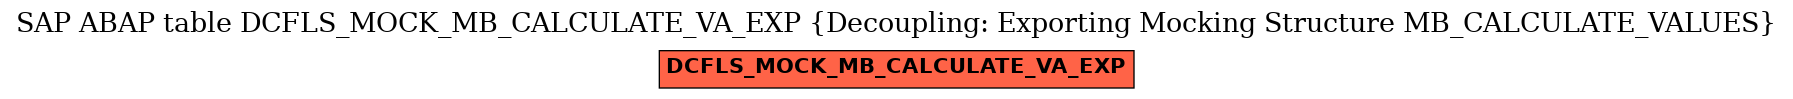 E-R Diagram for table DCFLS_MOCK_MB_CALCULATE_VA_EXP (Decoupling: Exporting Mocking Structure MB_CALCULATE_VALUES)